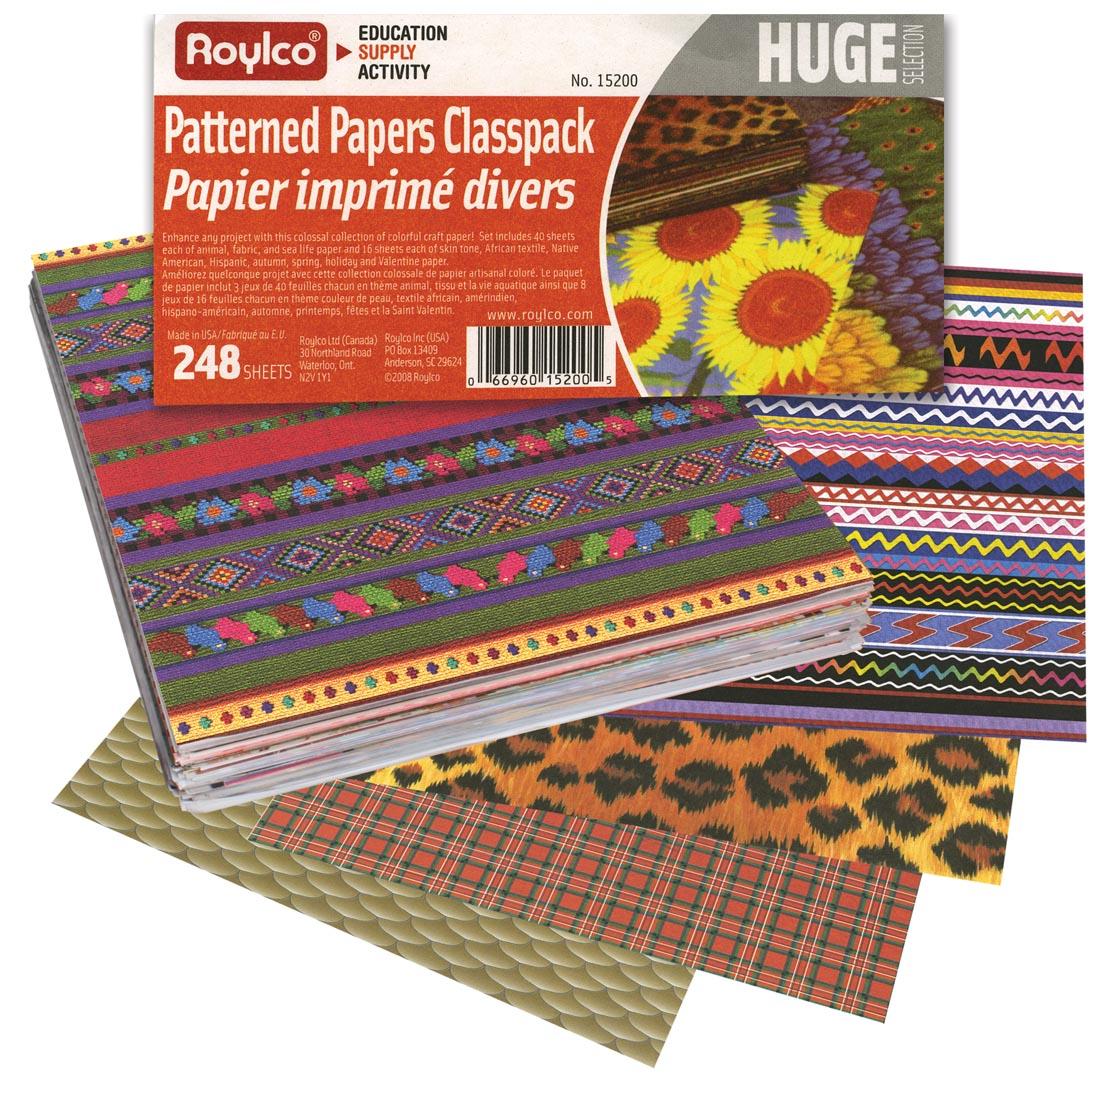 Roylco Patterned Papers Classpack